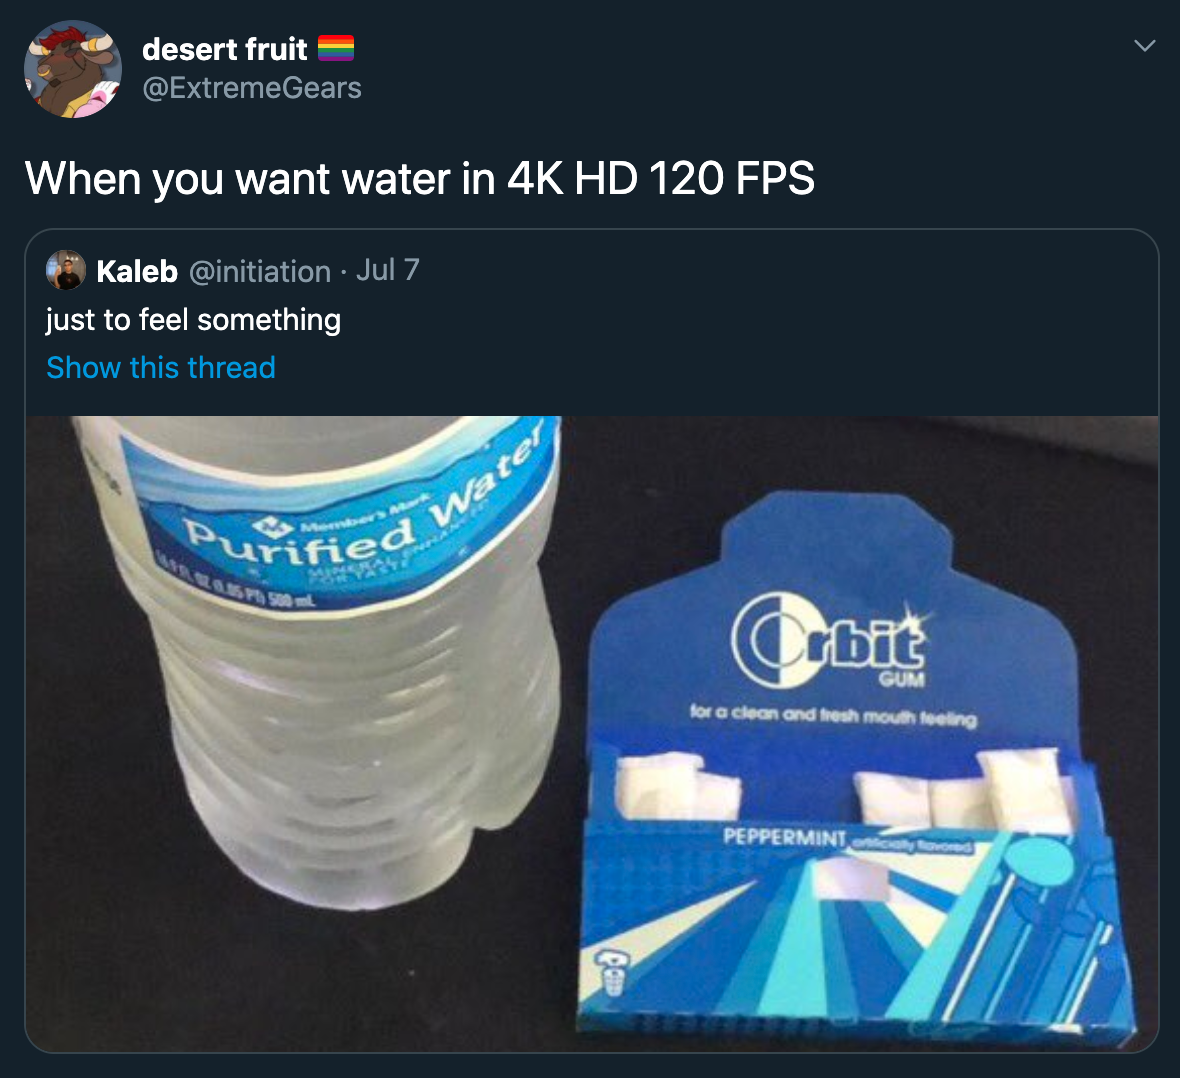 When you want water in 4K Hd 120